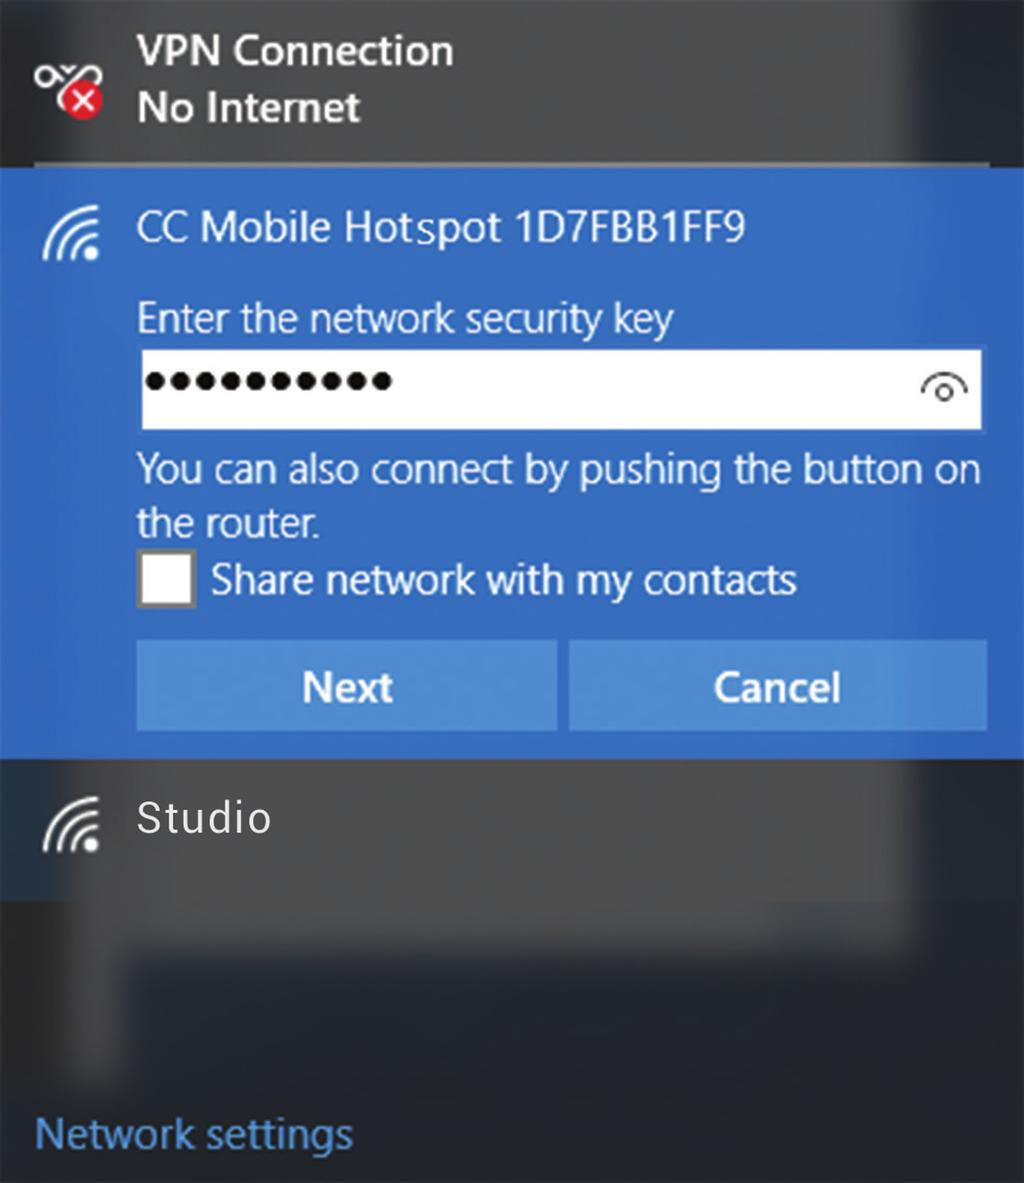 Hotspot, and then press Connect.